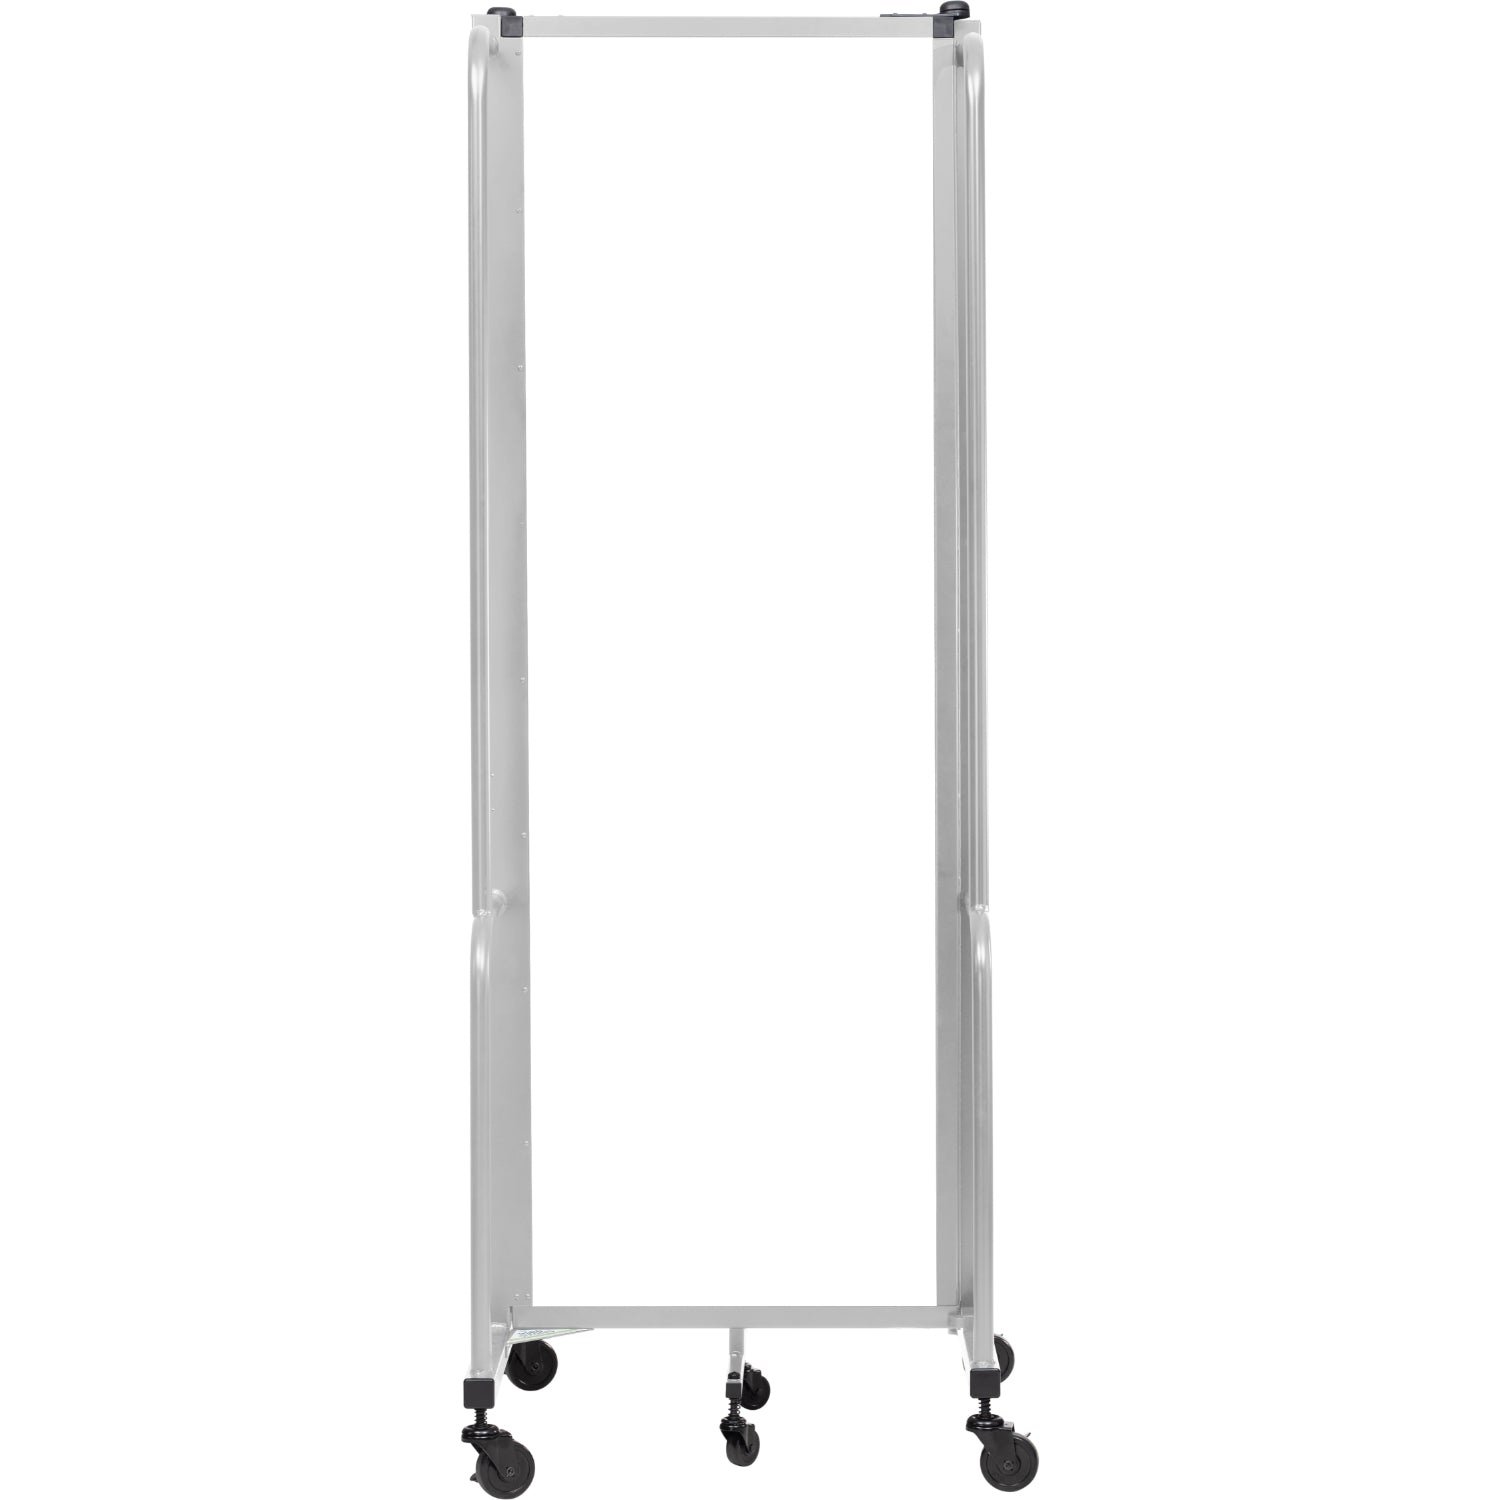 NPS Room Divider, 6' Height, 3 Sections, Clear Acrylic Panels